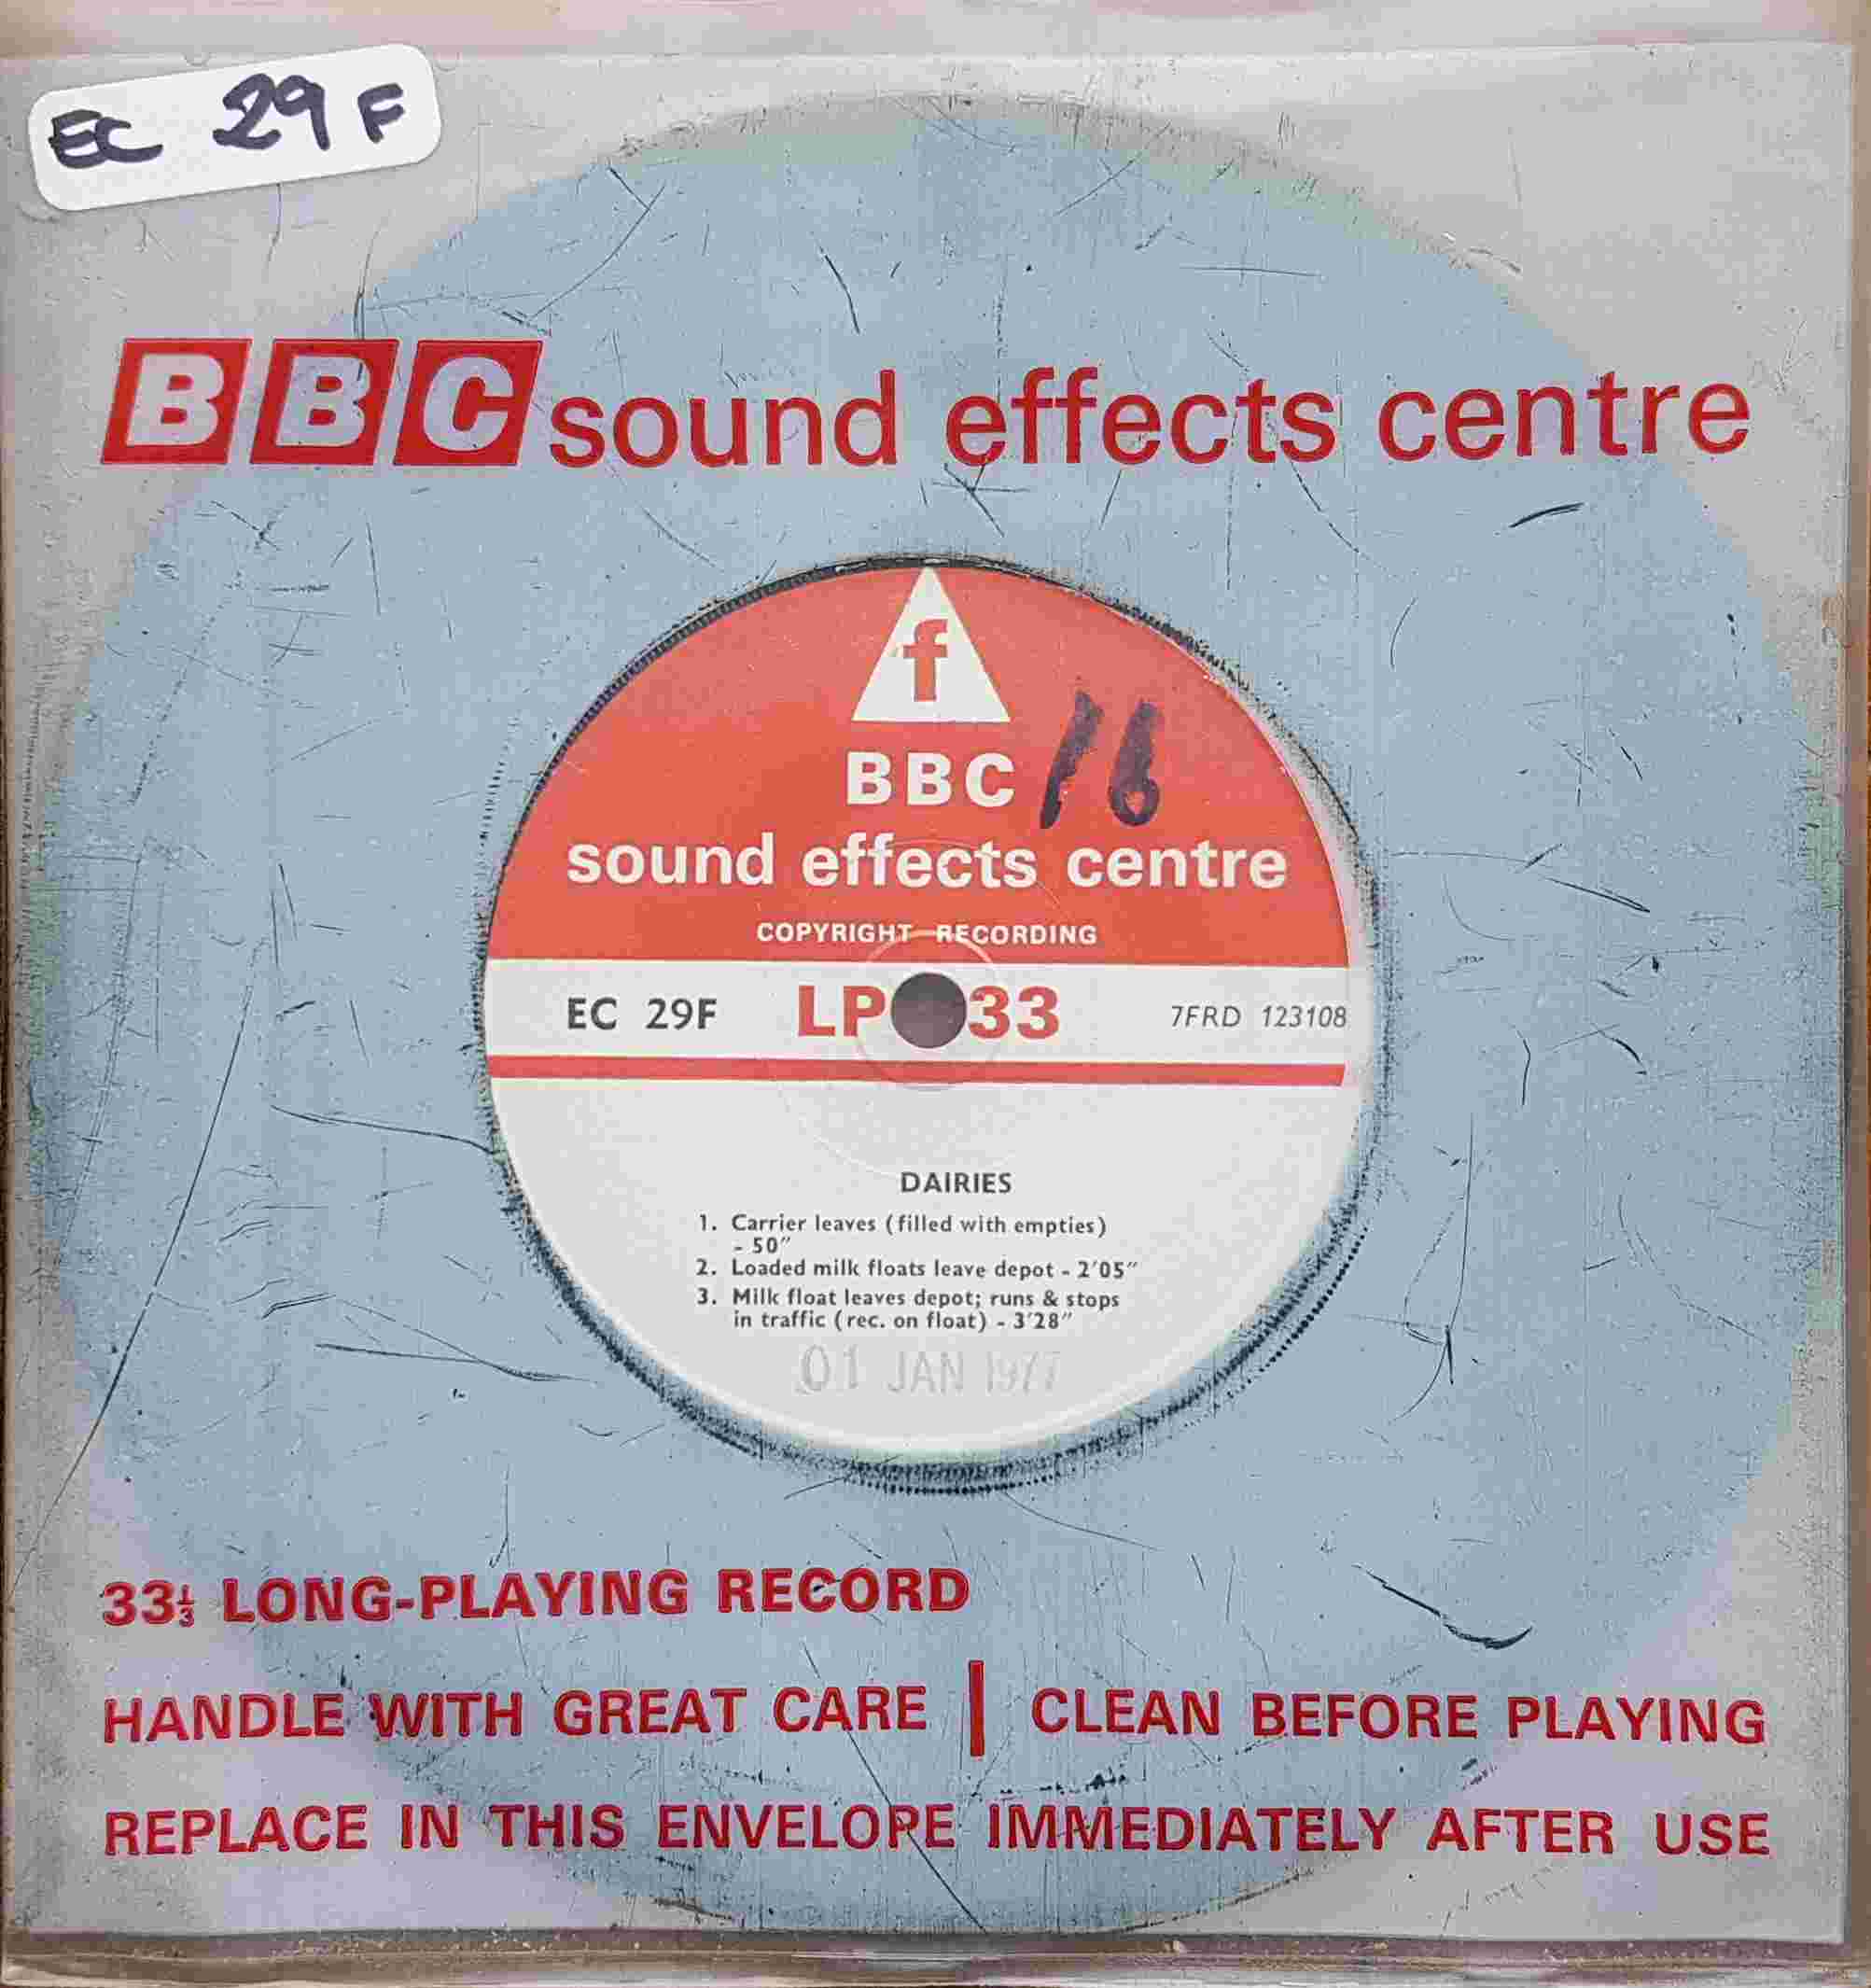 Picture of EC 29F Dairies by artist Not registered from the BBC records and Tapes library